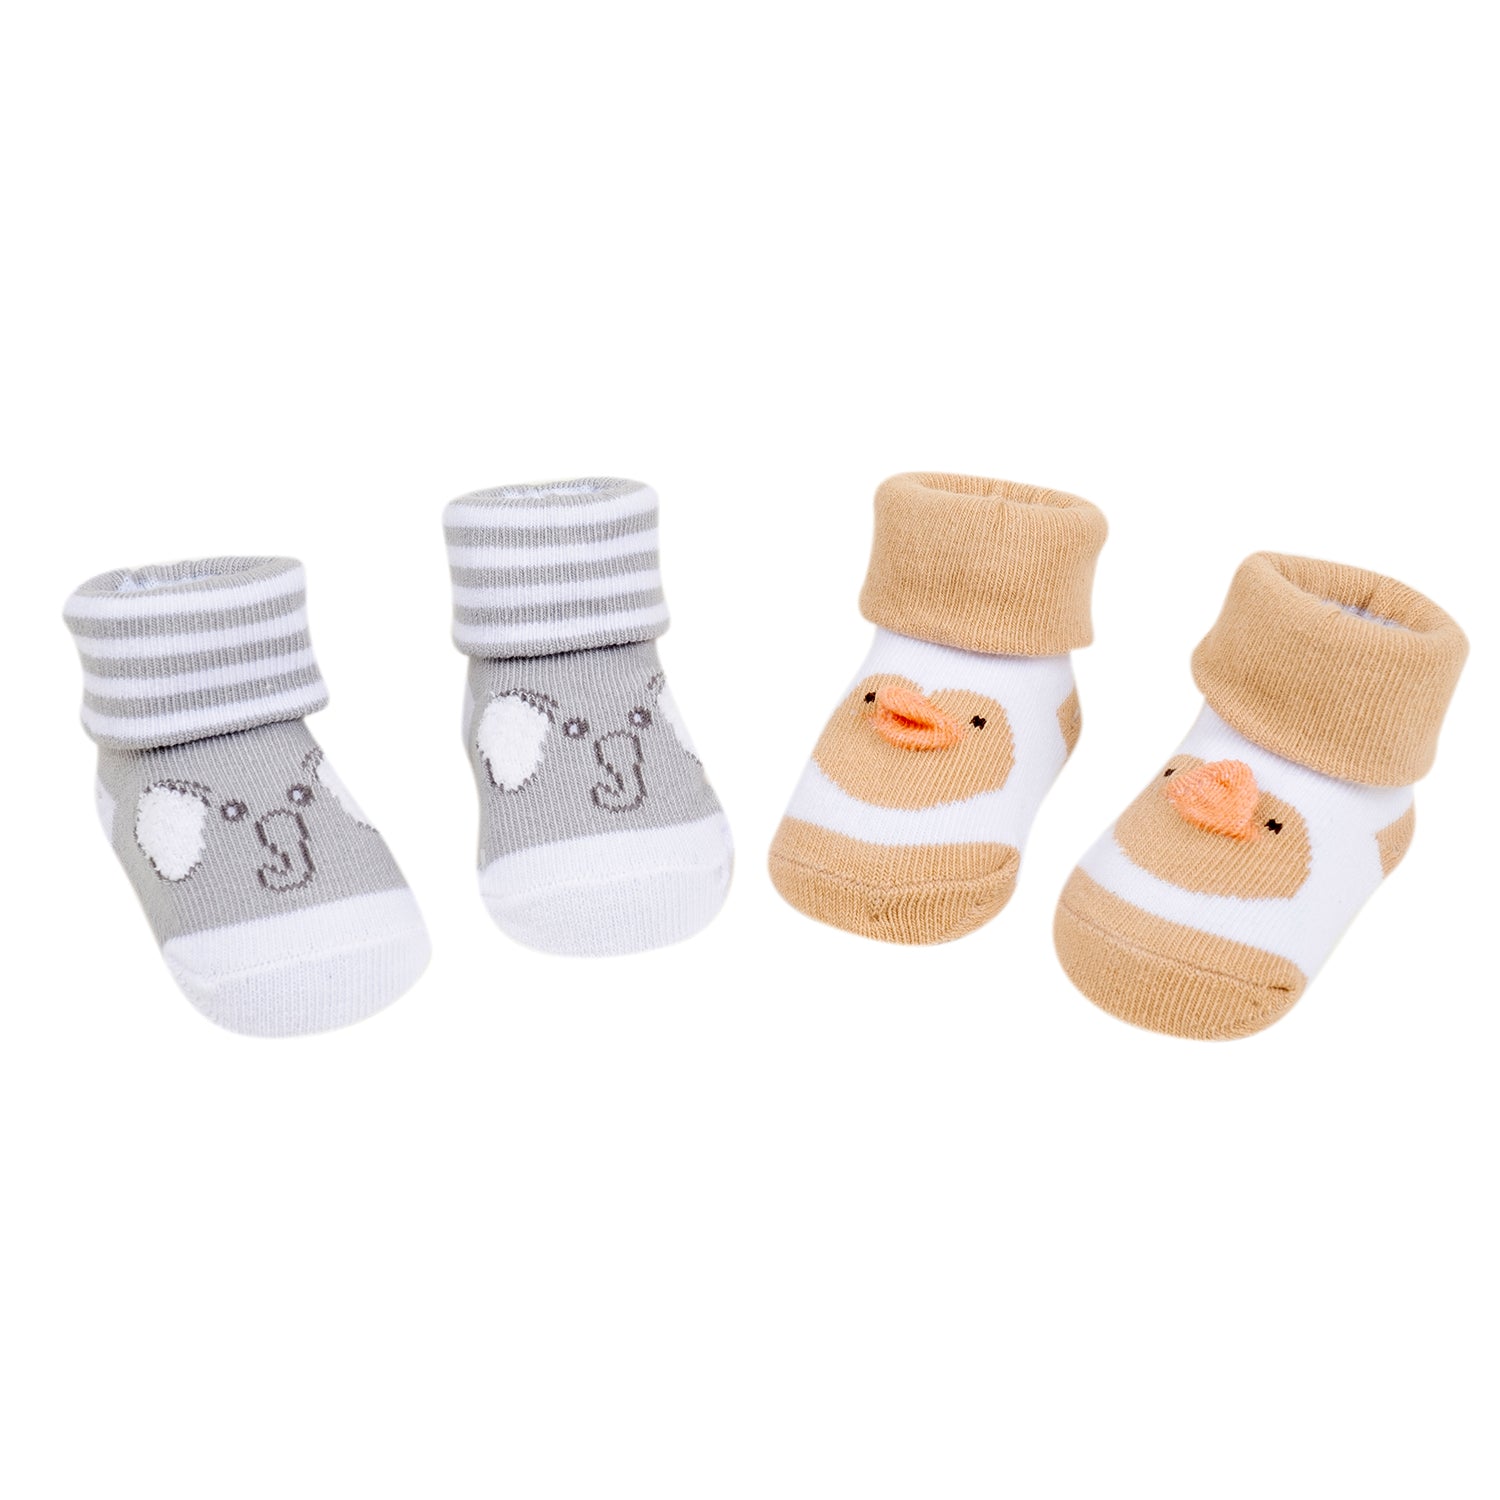 Baby Moo 3D Elephant Chick Cotton Ankle Length Infant Dress Up Walking Set of 2 Socks Booties - Beige